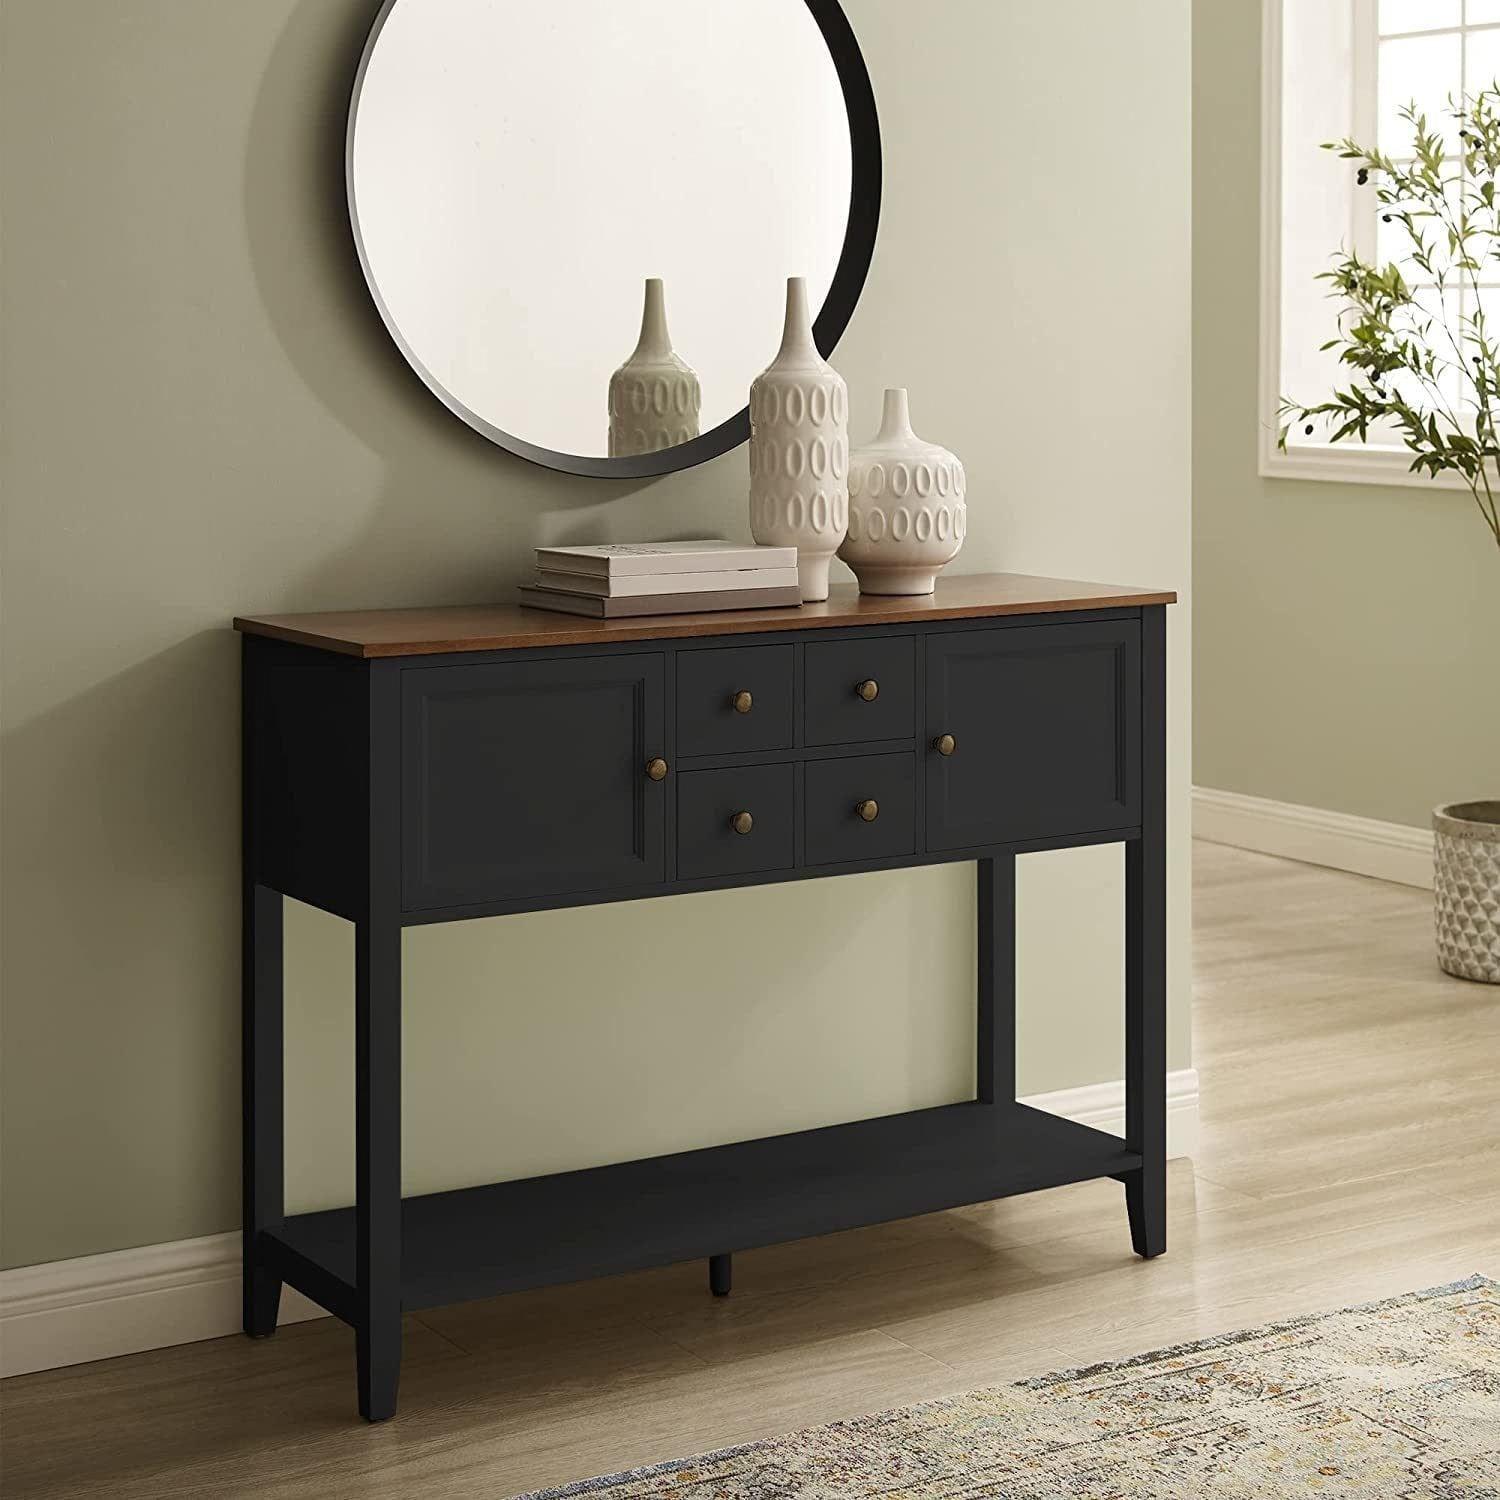 Shop Sideboard Buffet Storage Cabinet with Storage Drawers Storage Cabinets and Large Shelf Mademoiselle Home Decor